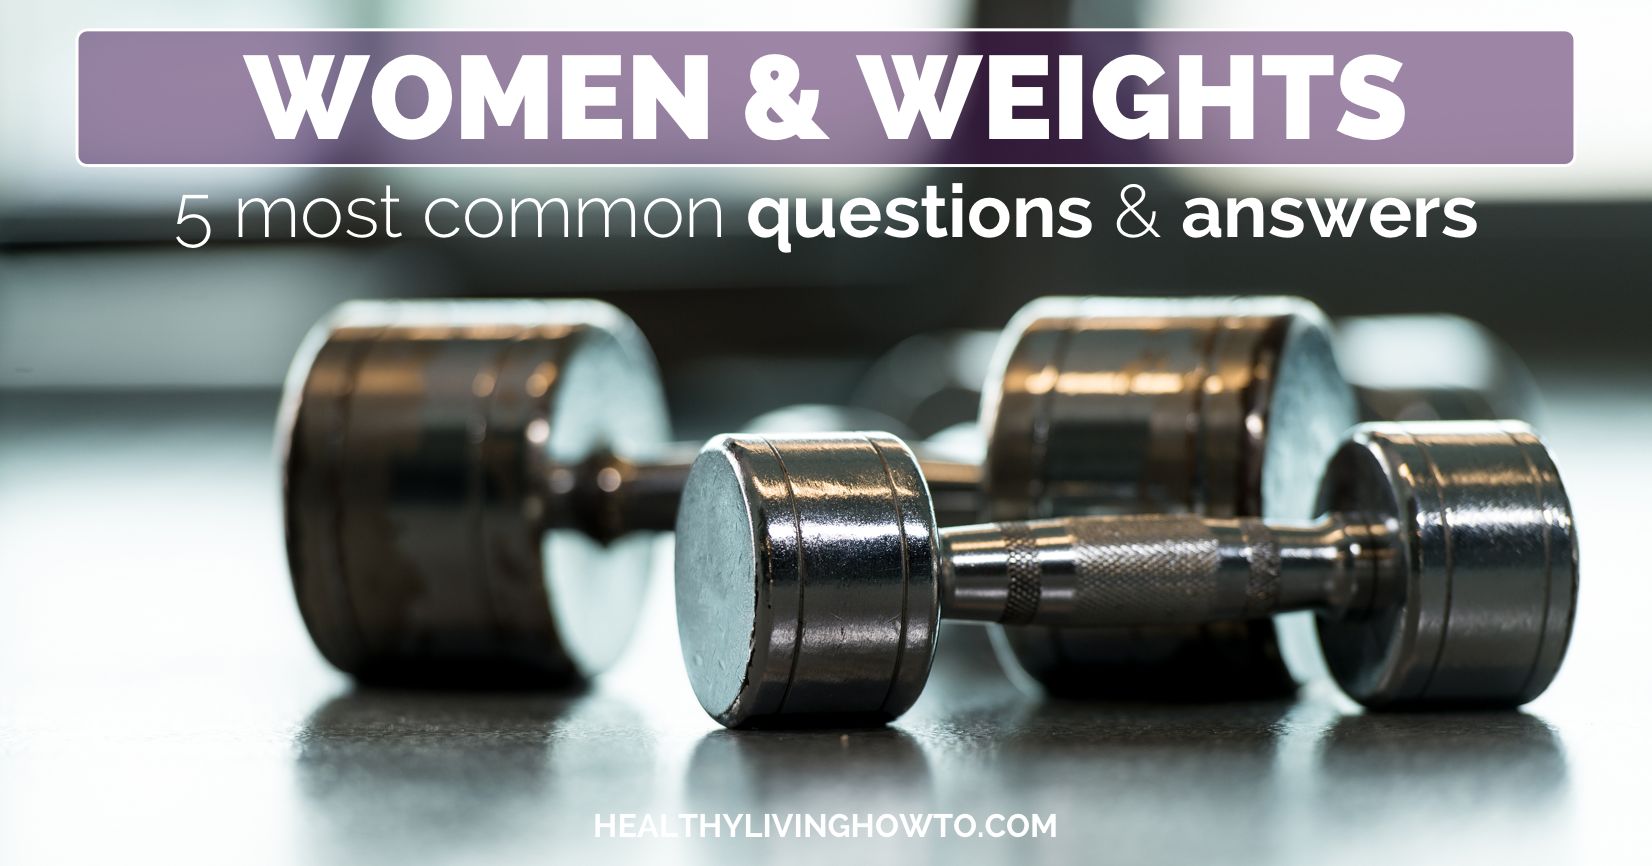 Women & Weights 5 Most Common Questions & Answers | healthylivinghowto.com